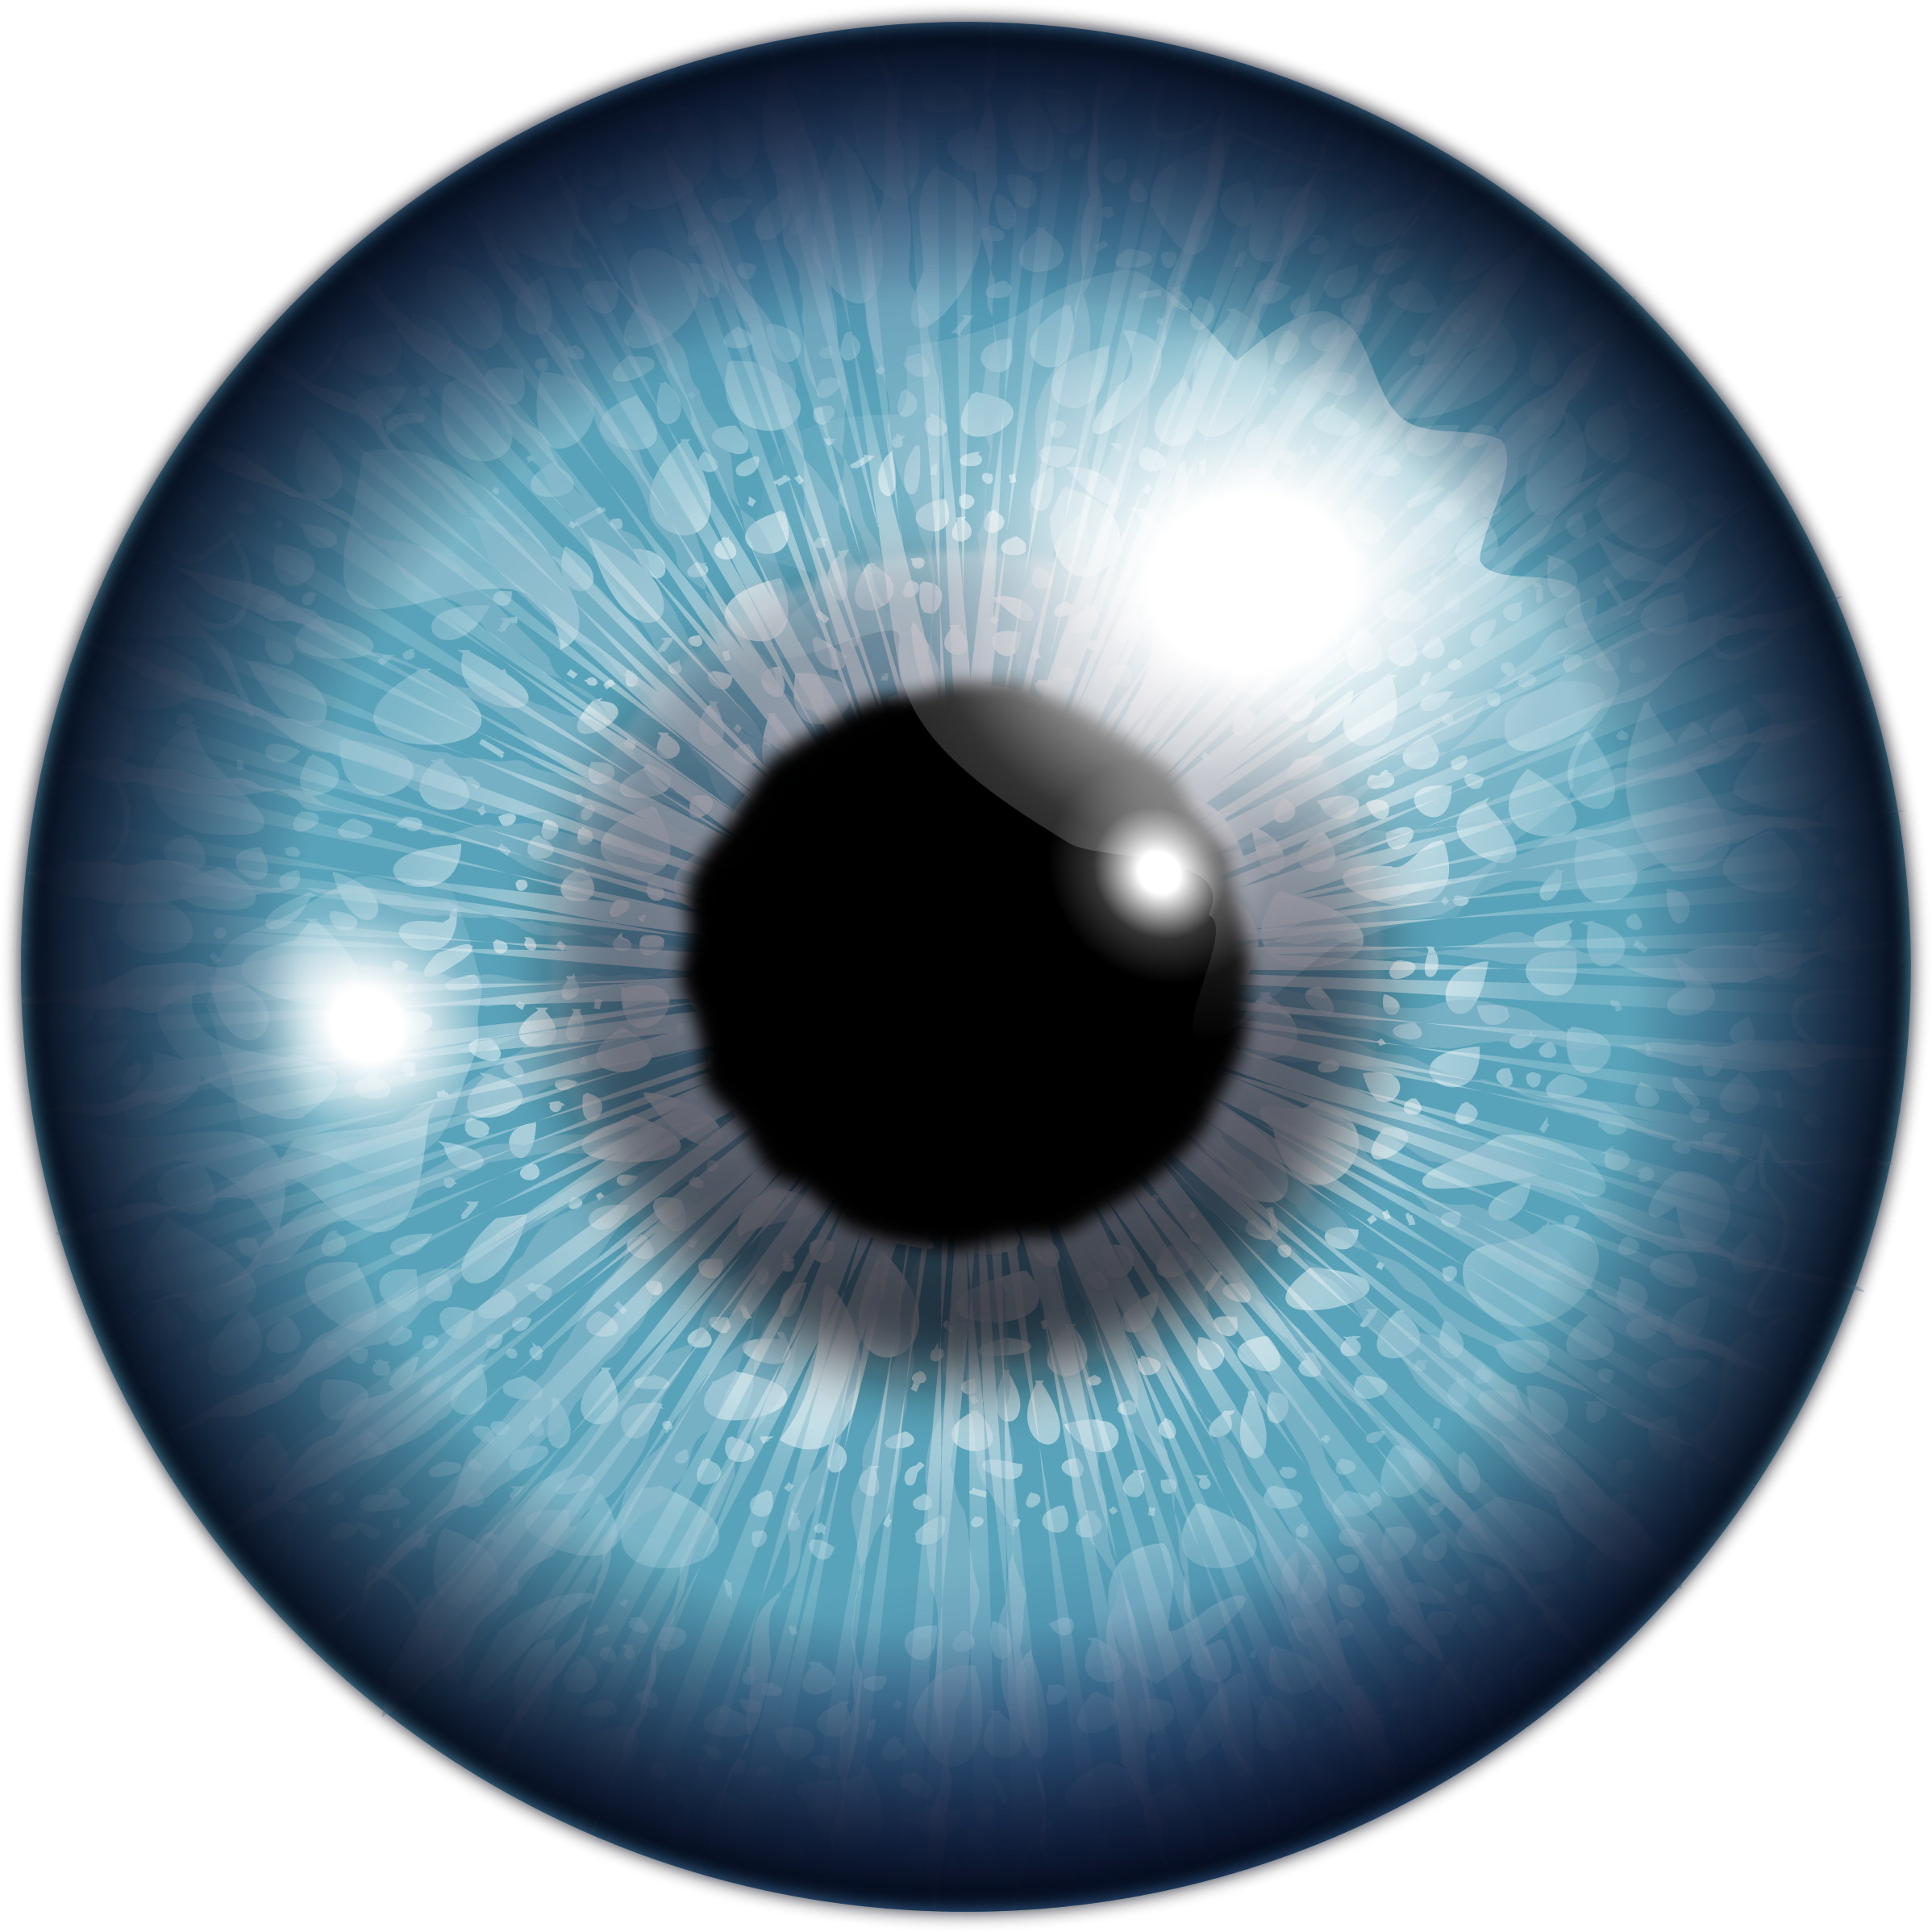 Eye PNG Transparent Images Free Download - Pngfre